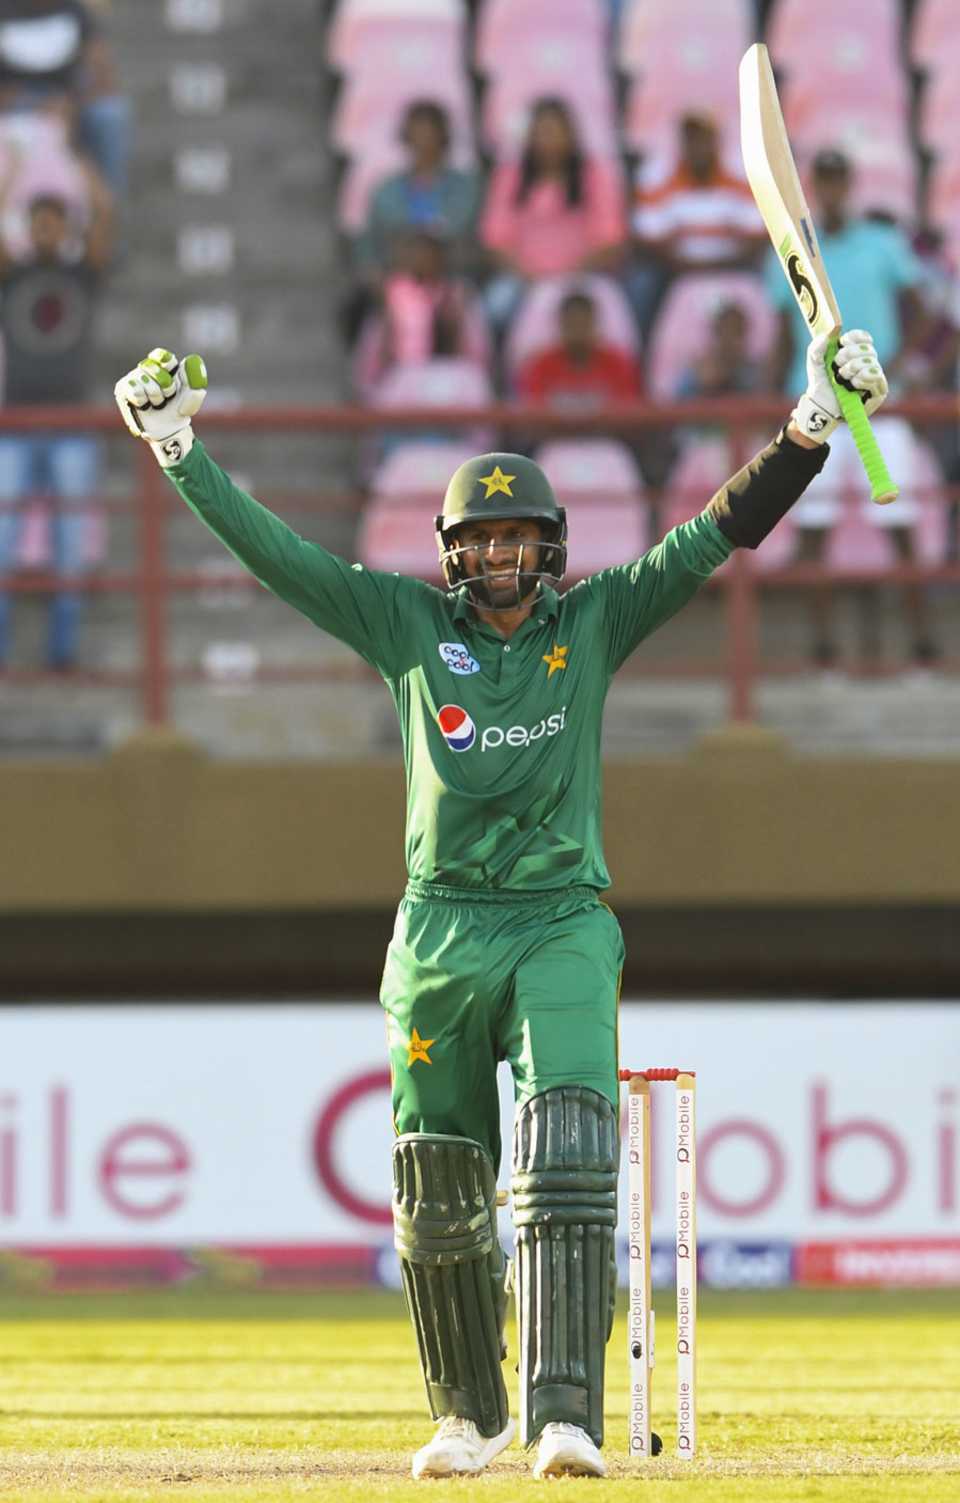 Shoaib Malik went to his hundred with a six from the final ball of the chase